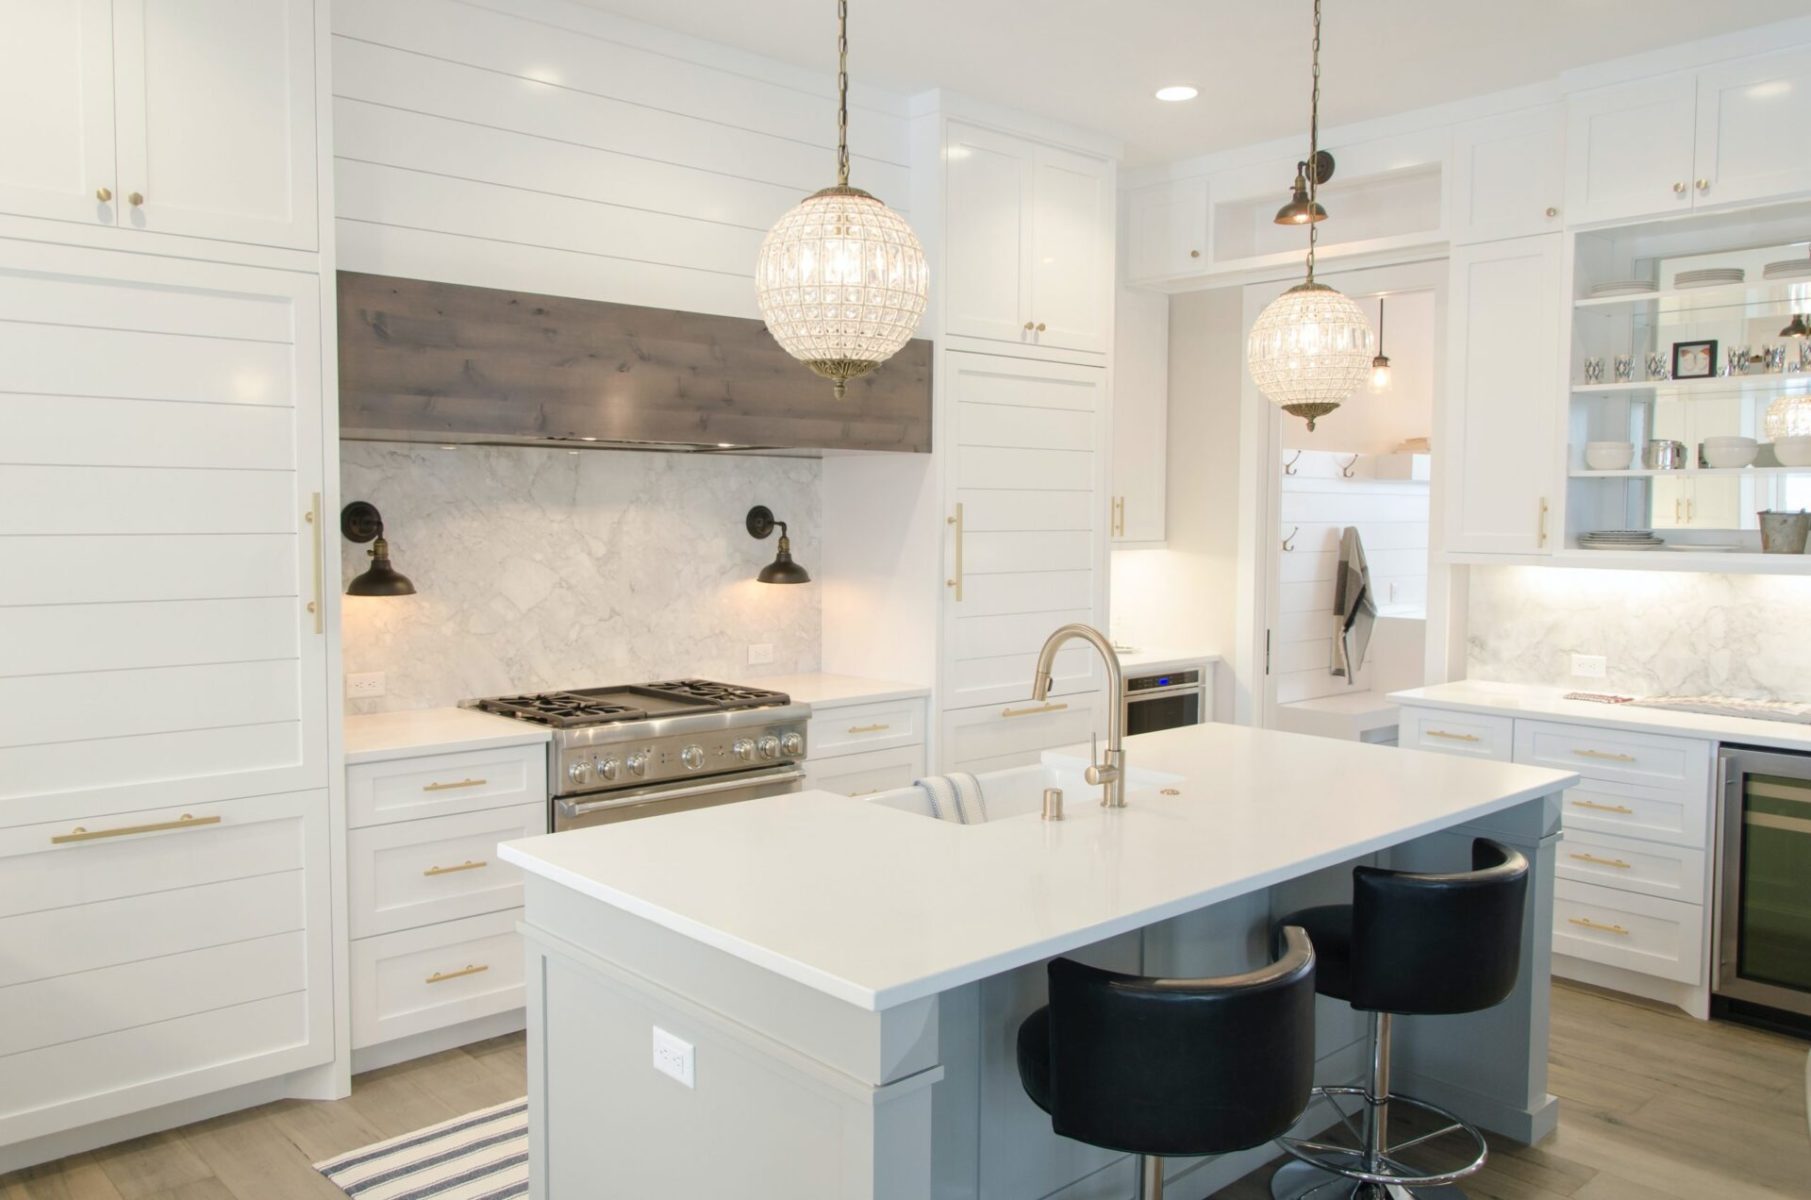 5 Kitchen Lighting Ideas for Your Home